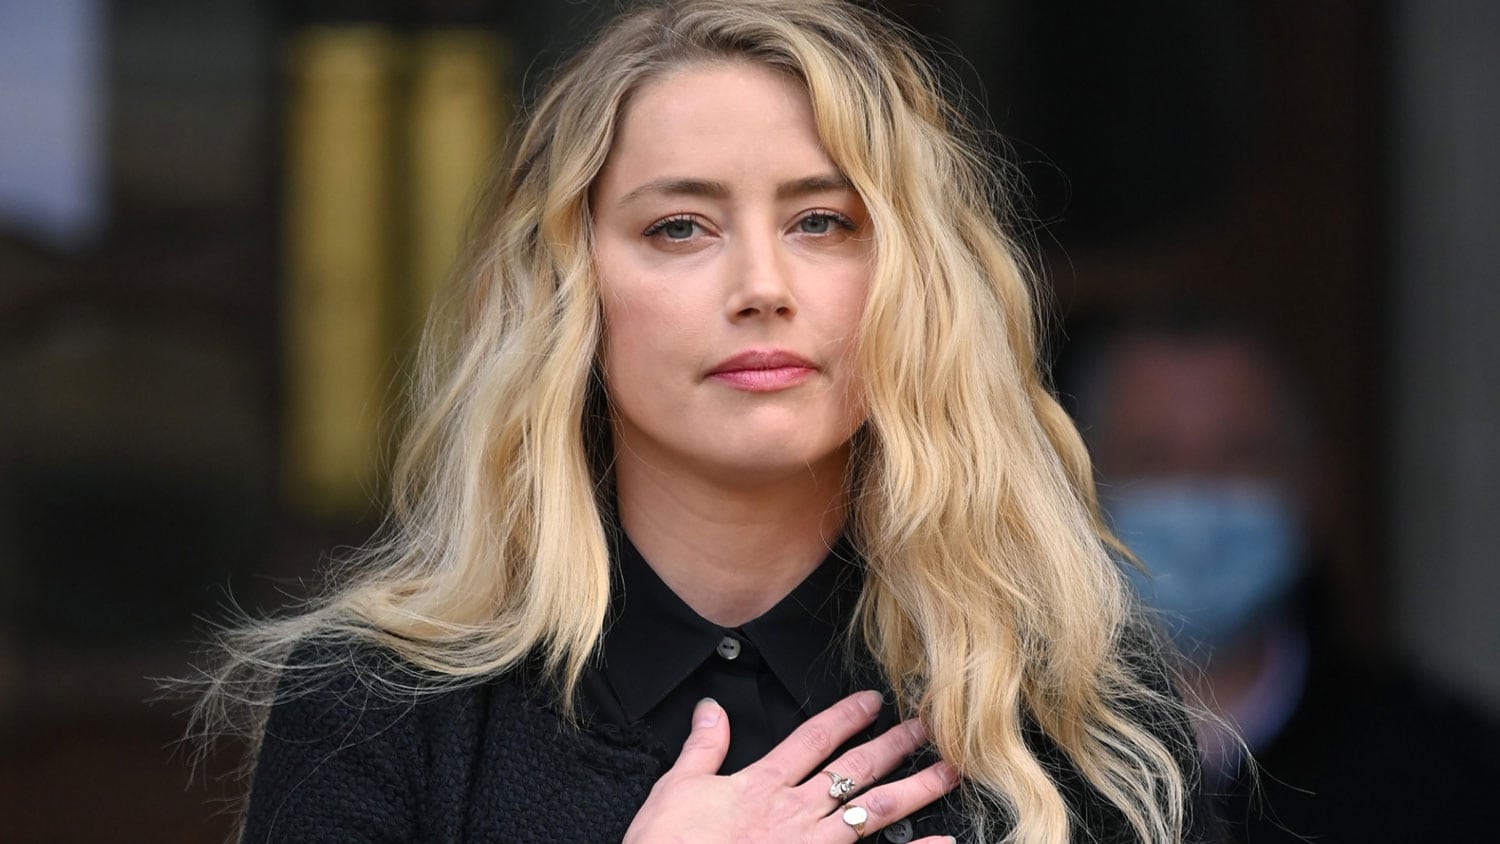 Heard Porn - Amber Heard Reportedly Offered $10M To Star In An Adult Movie